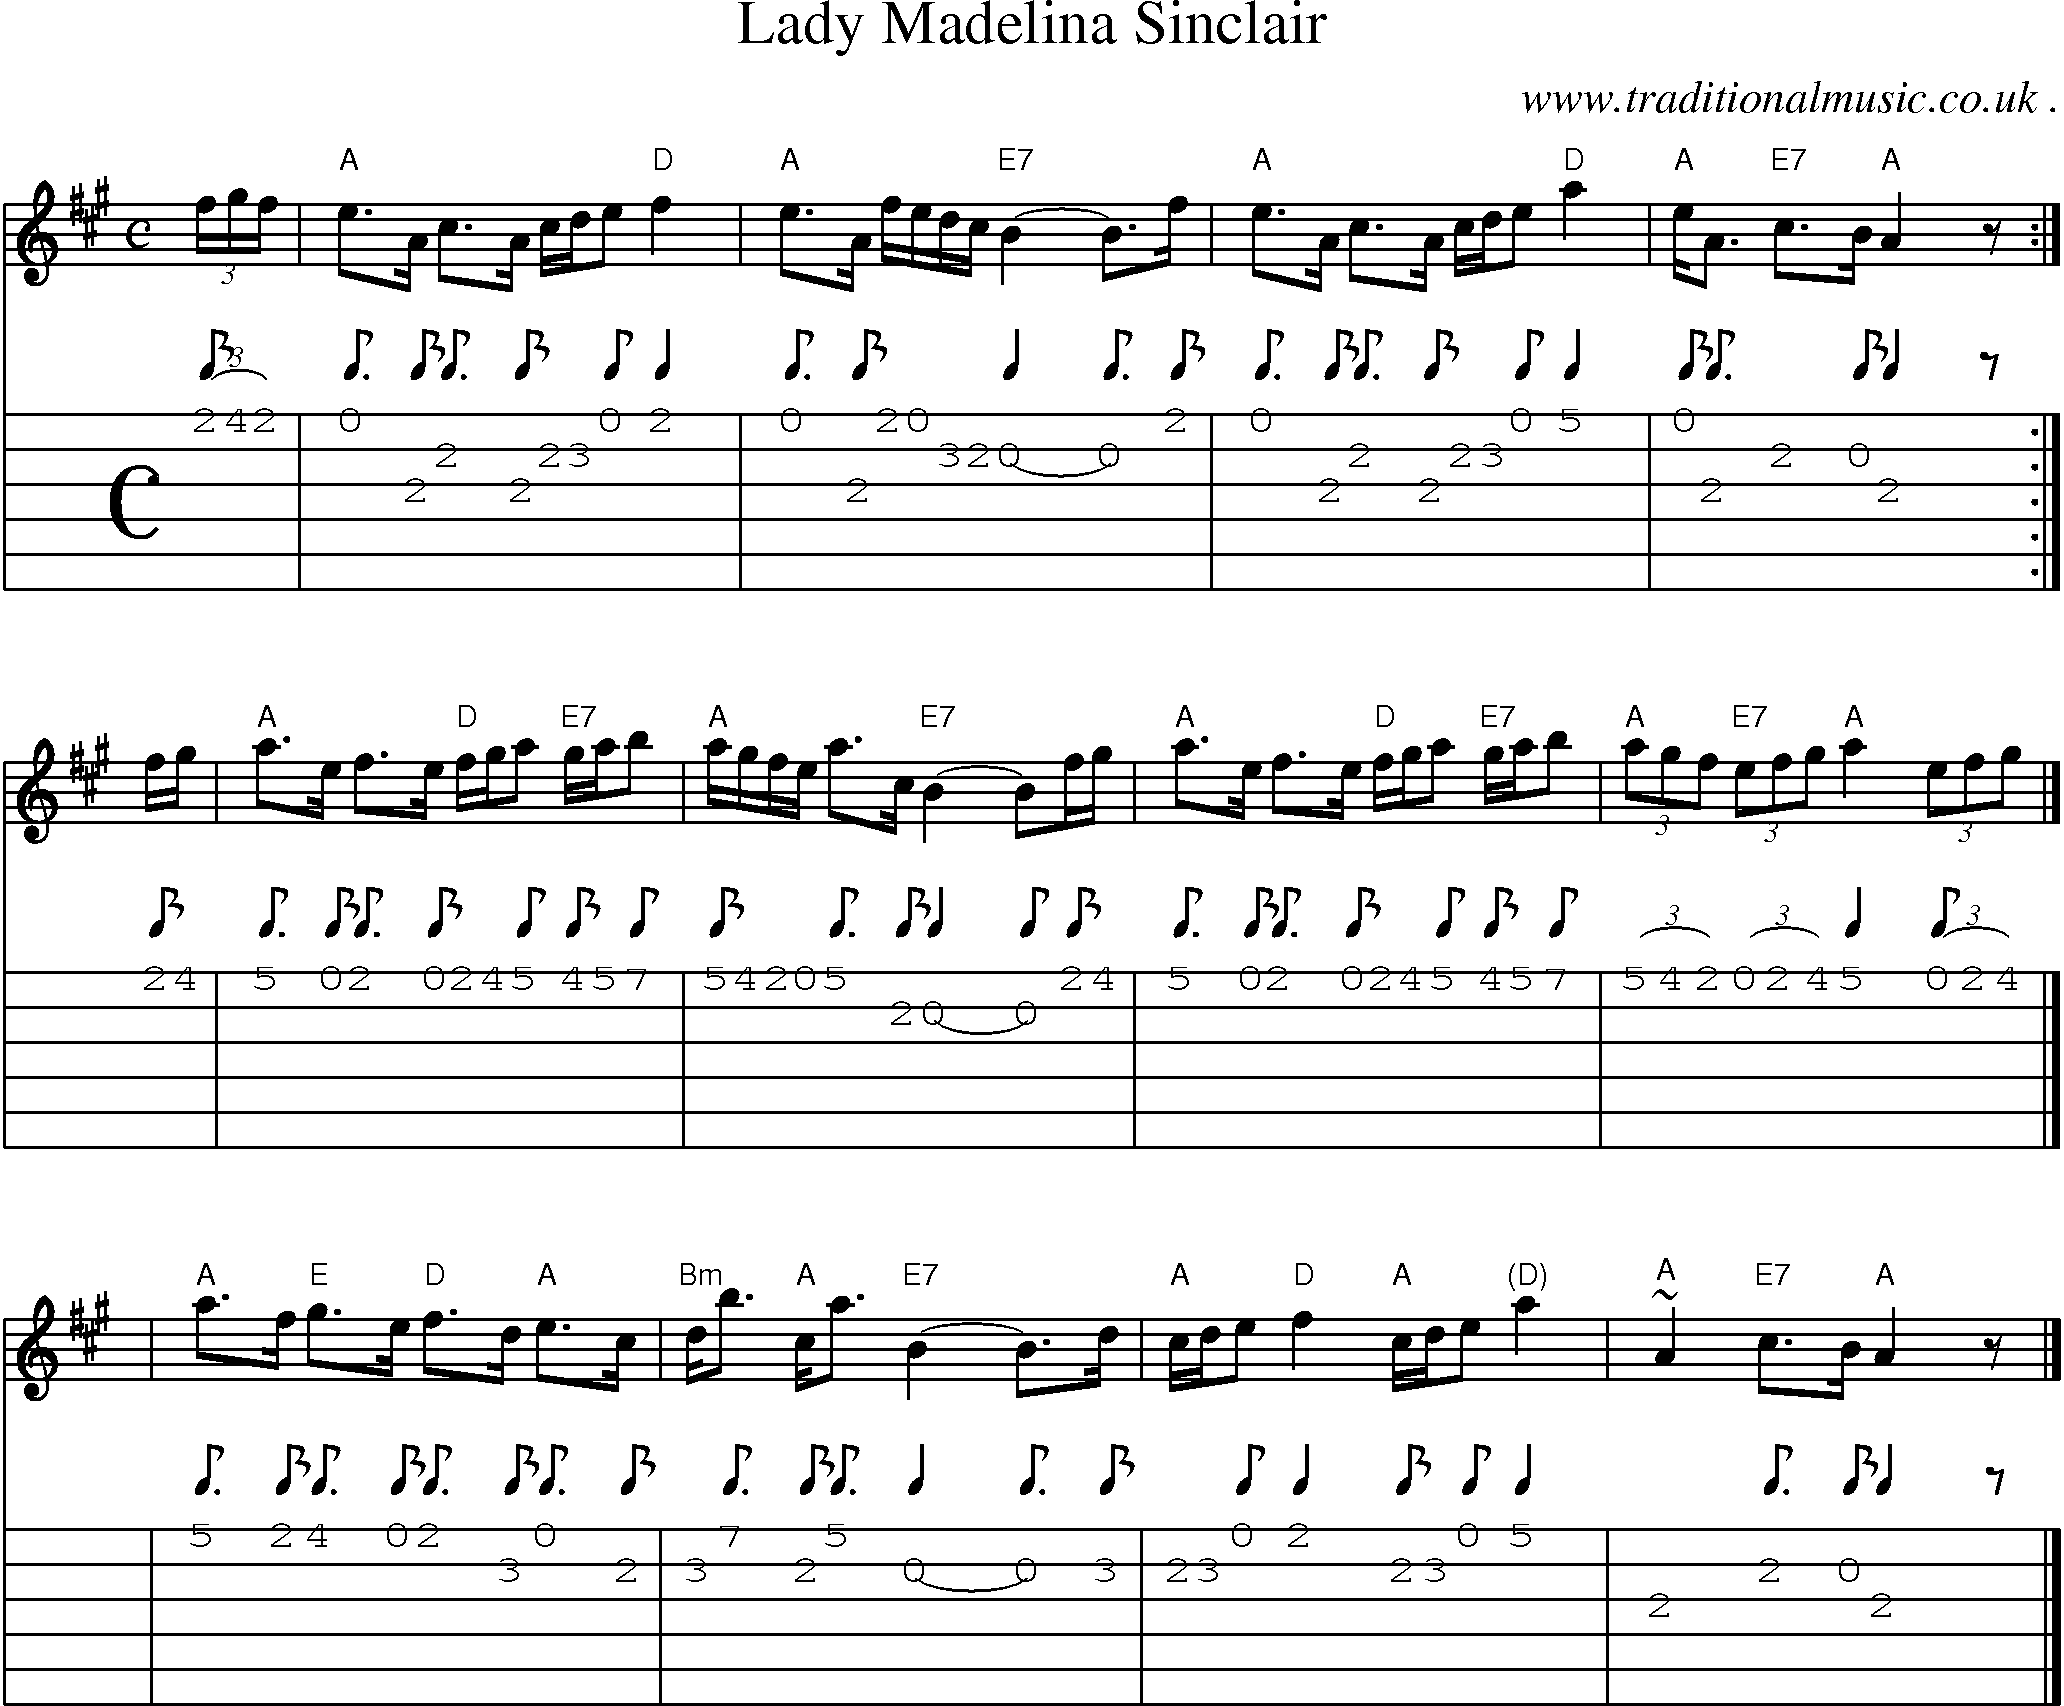 Sheet-music  score, Chords and Guitar Tabs for Lady Madelina Sinclair